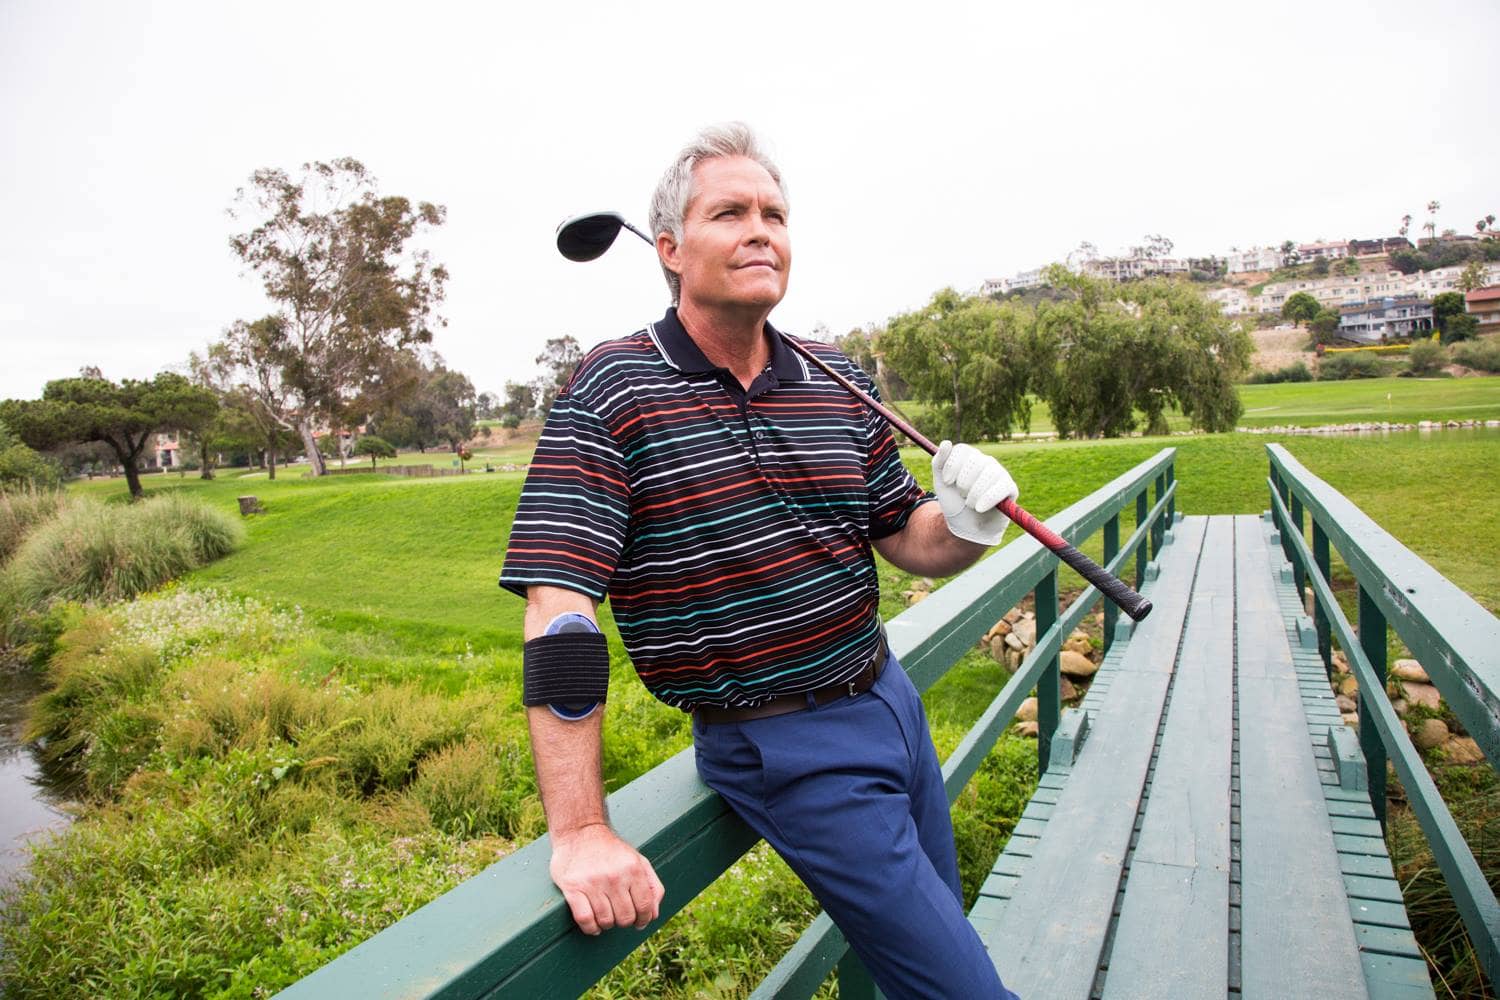 Wear Oska Pulse PEMF device while playing golf. Relive pain and improve your game.